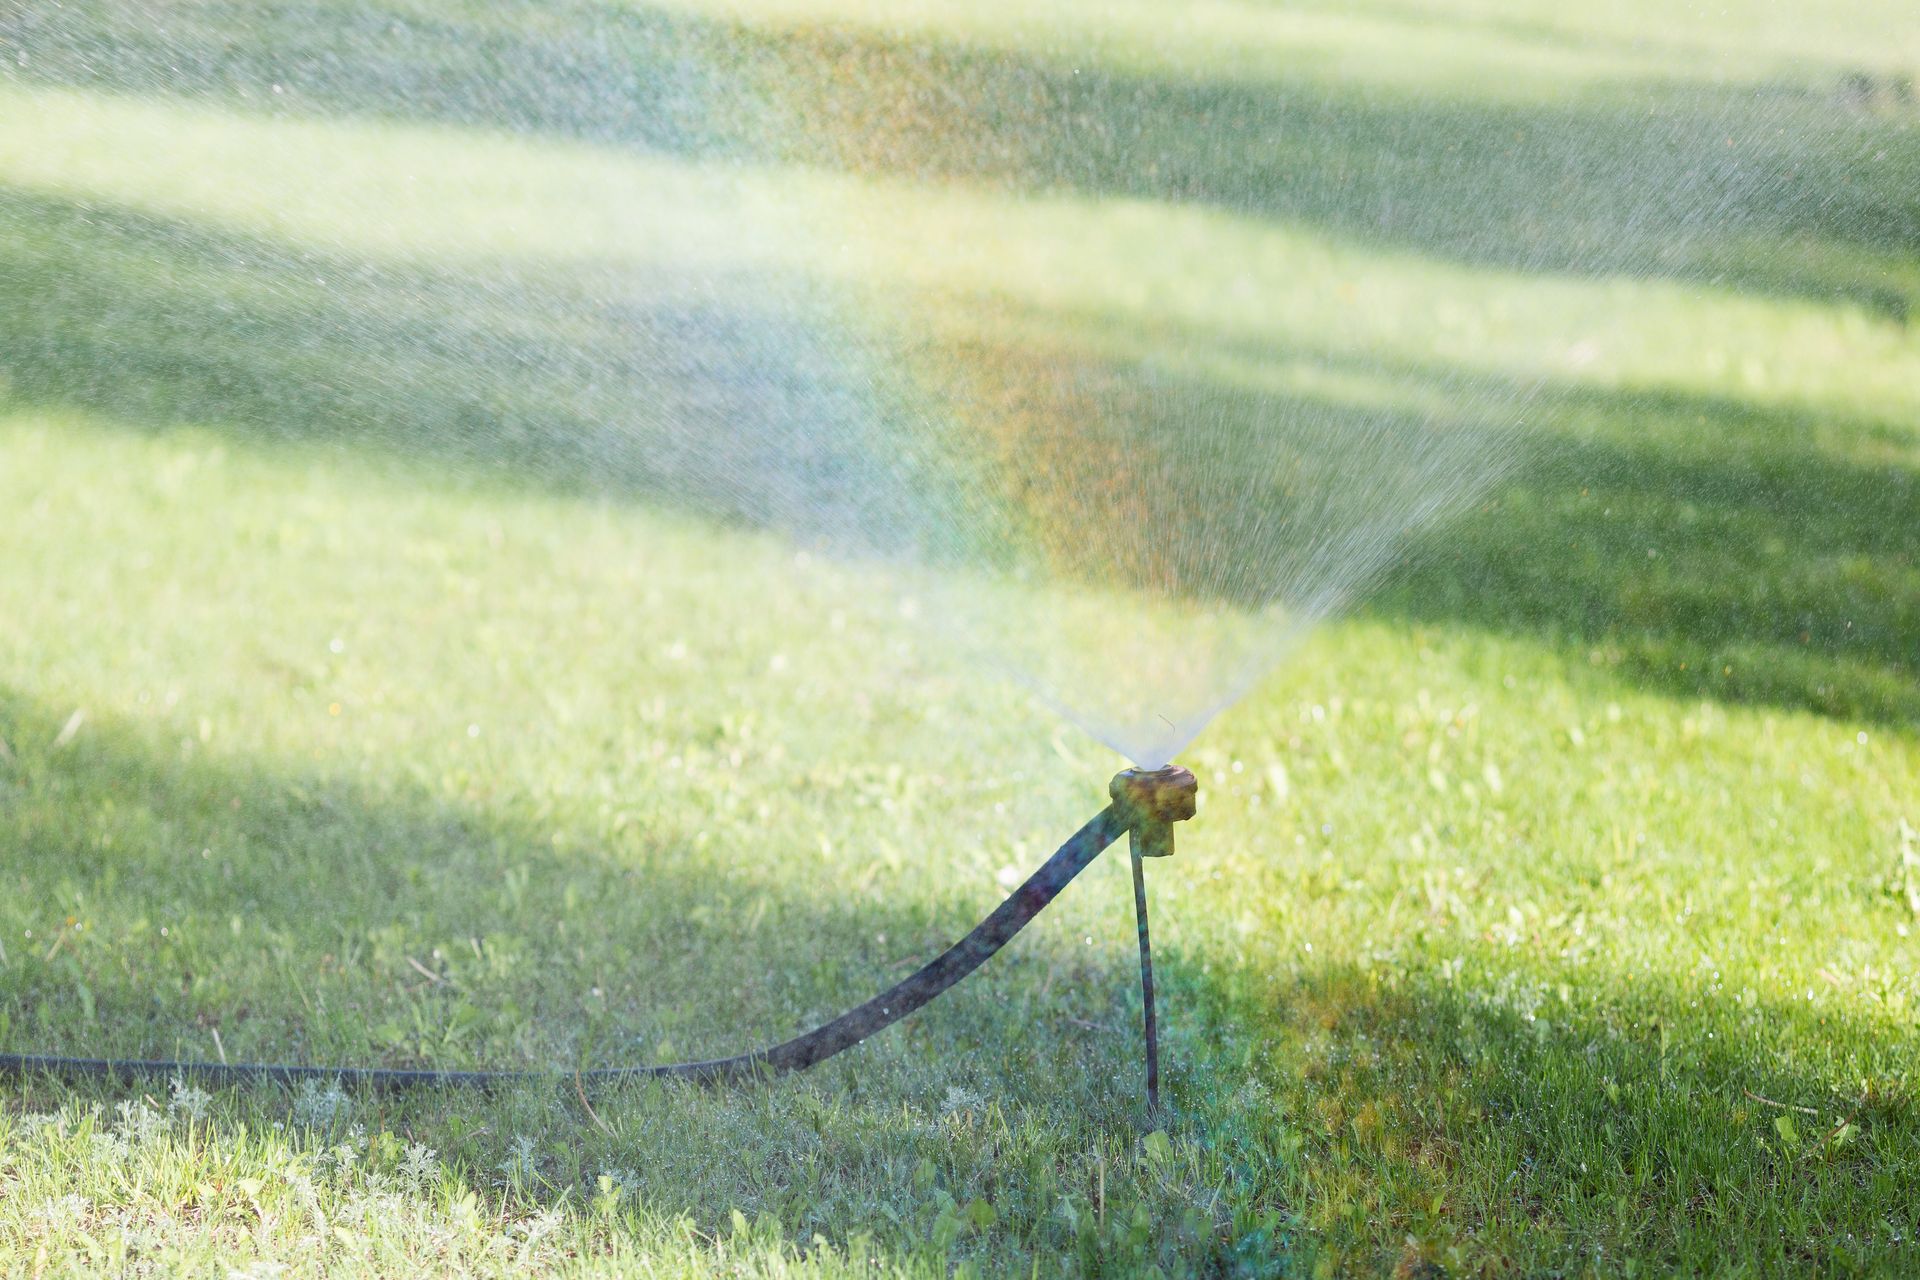 Fogging a lawn to rid it of insects